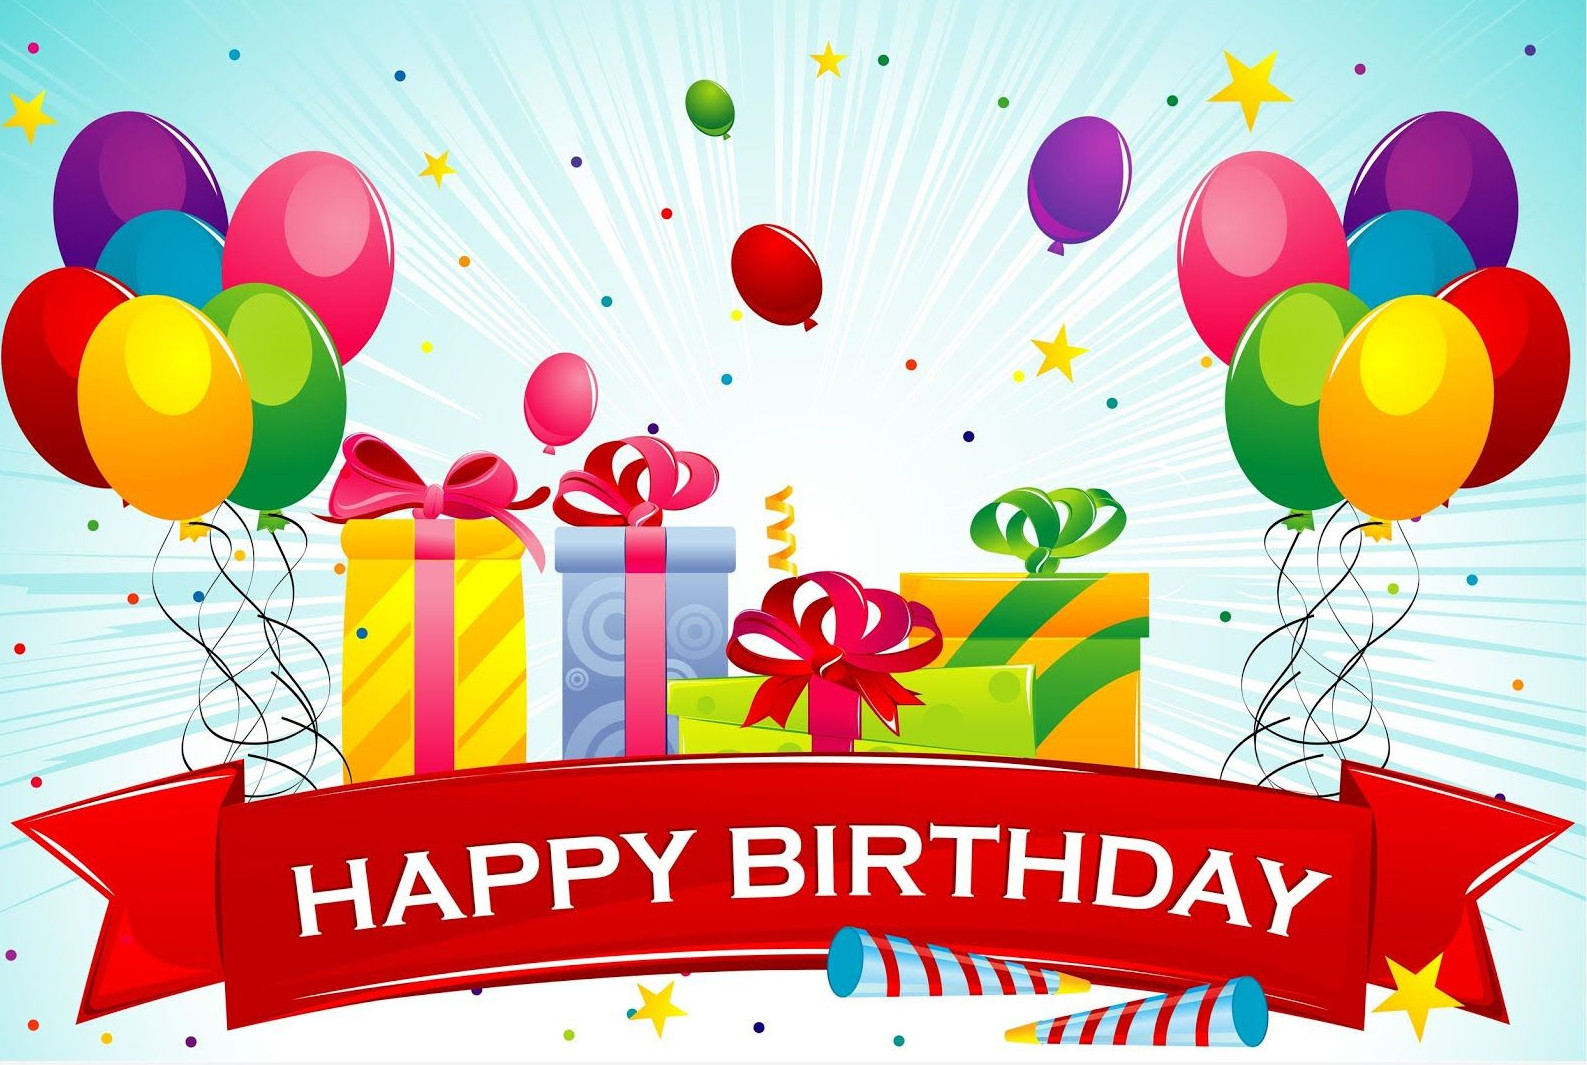 Birthday Greeting Card
 35 Happy Birthday Cards Free To Download – The WoW Style